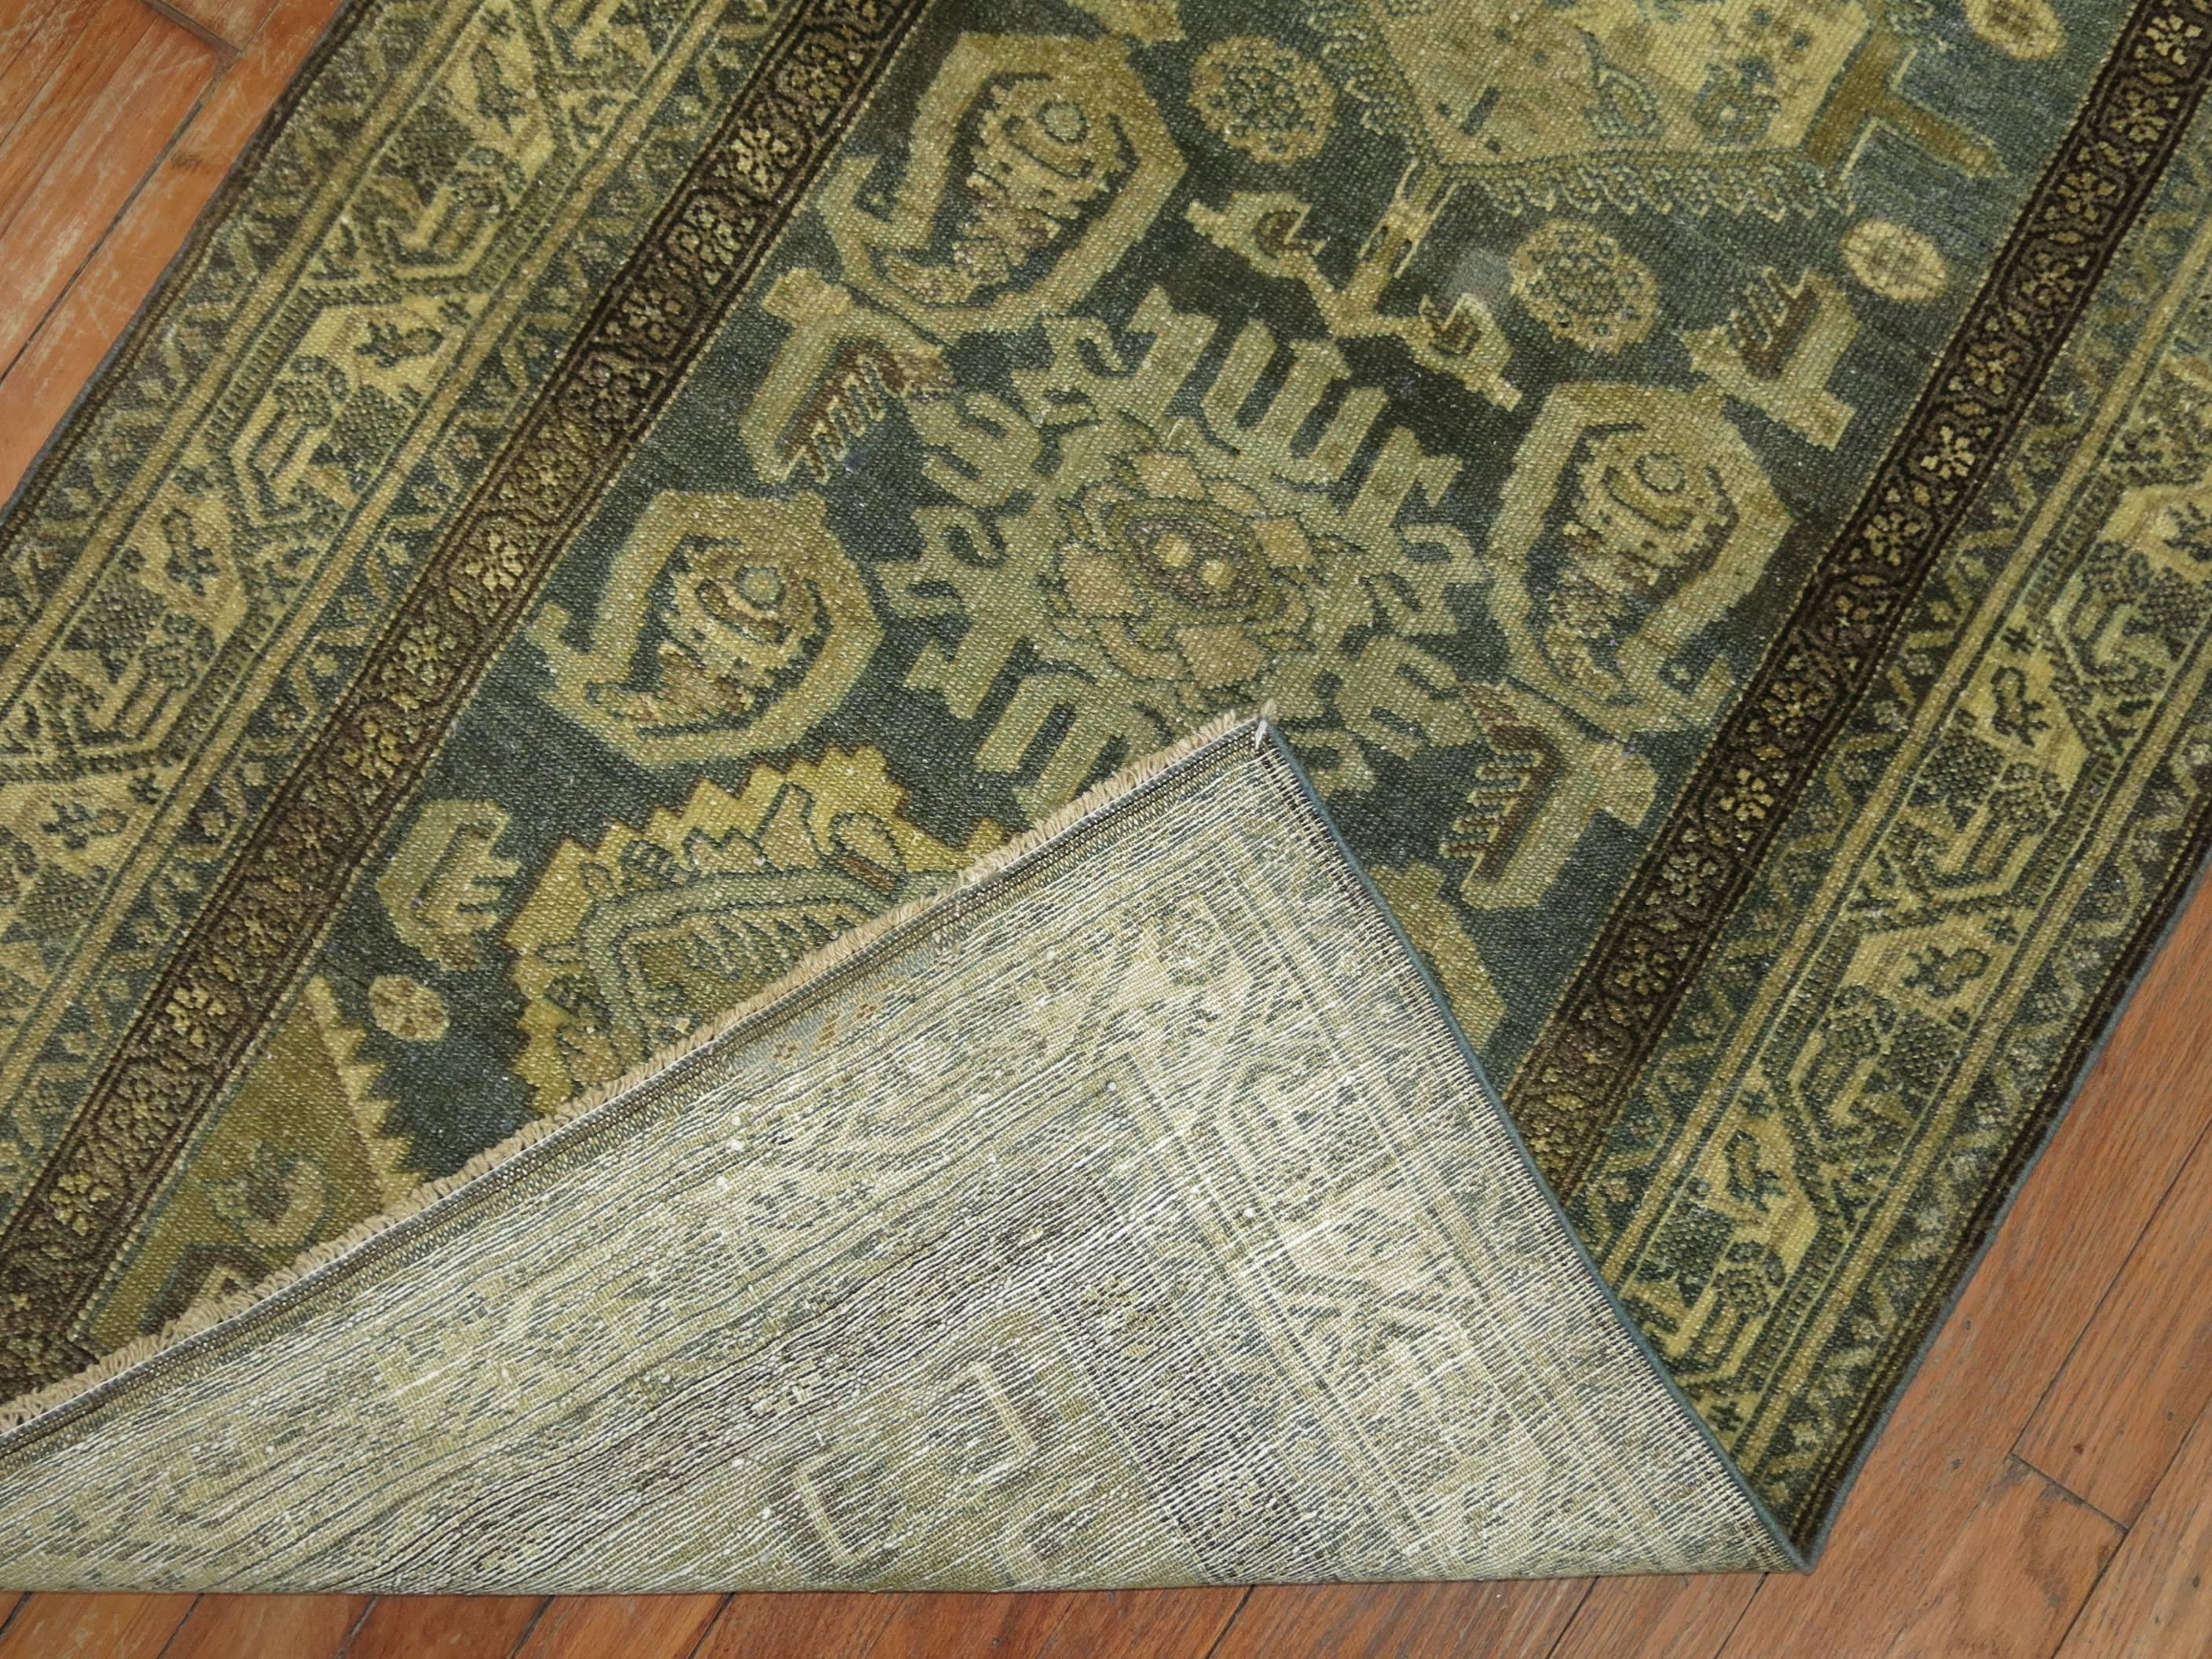 An early 20th century Persian Malayer runner.